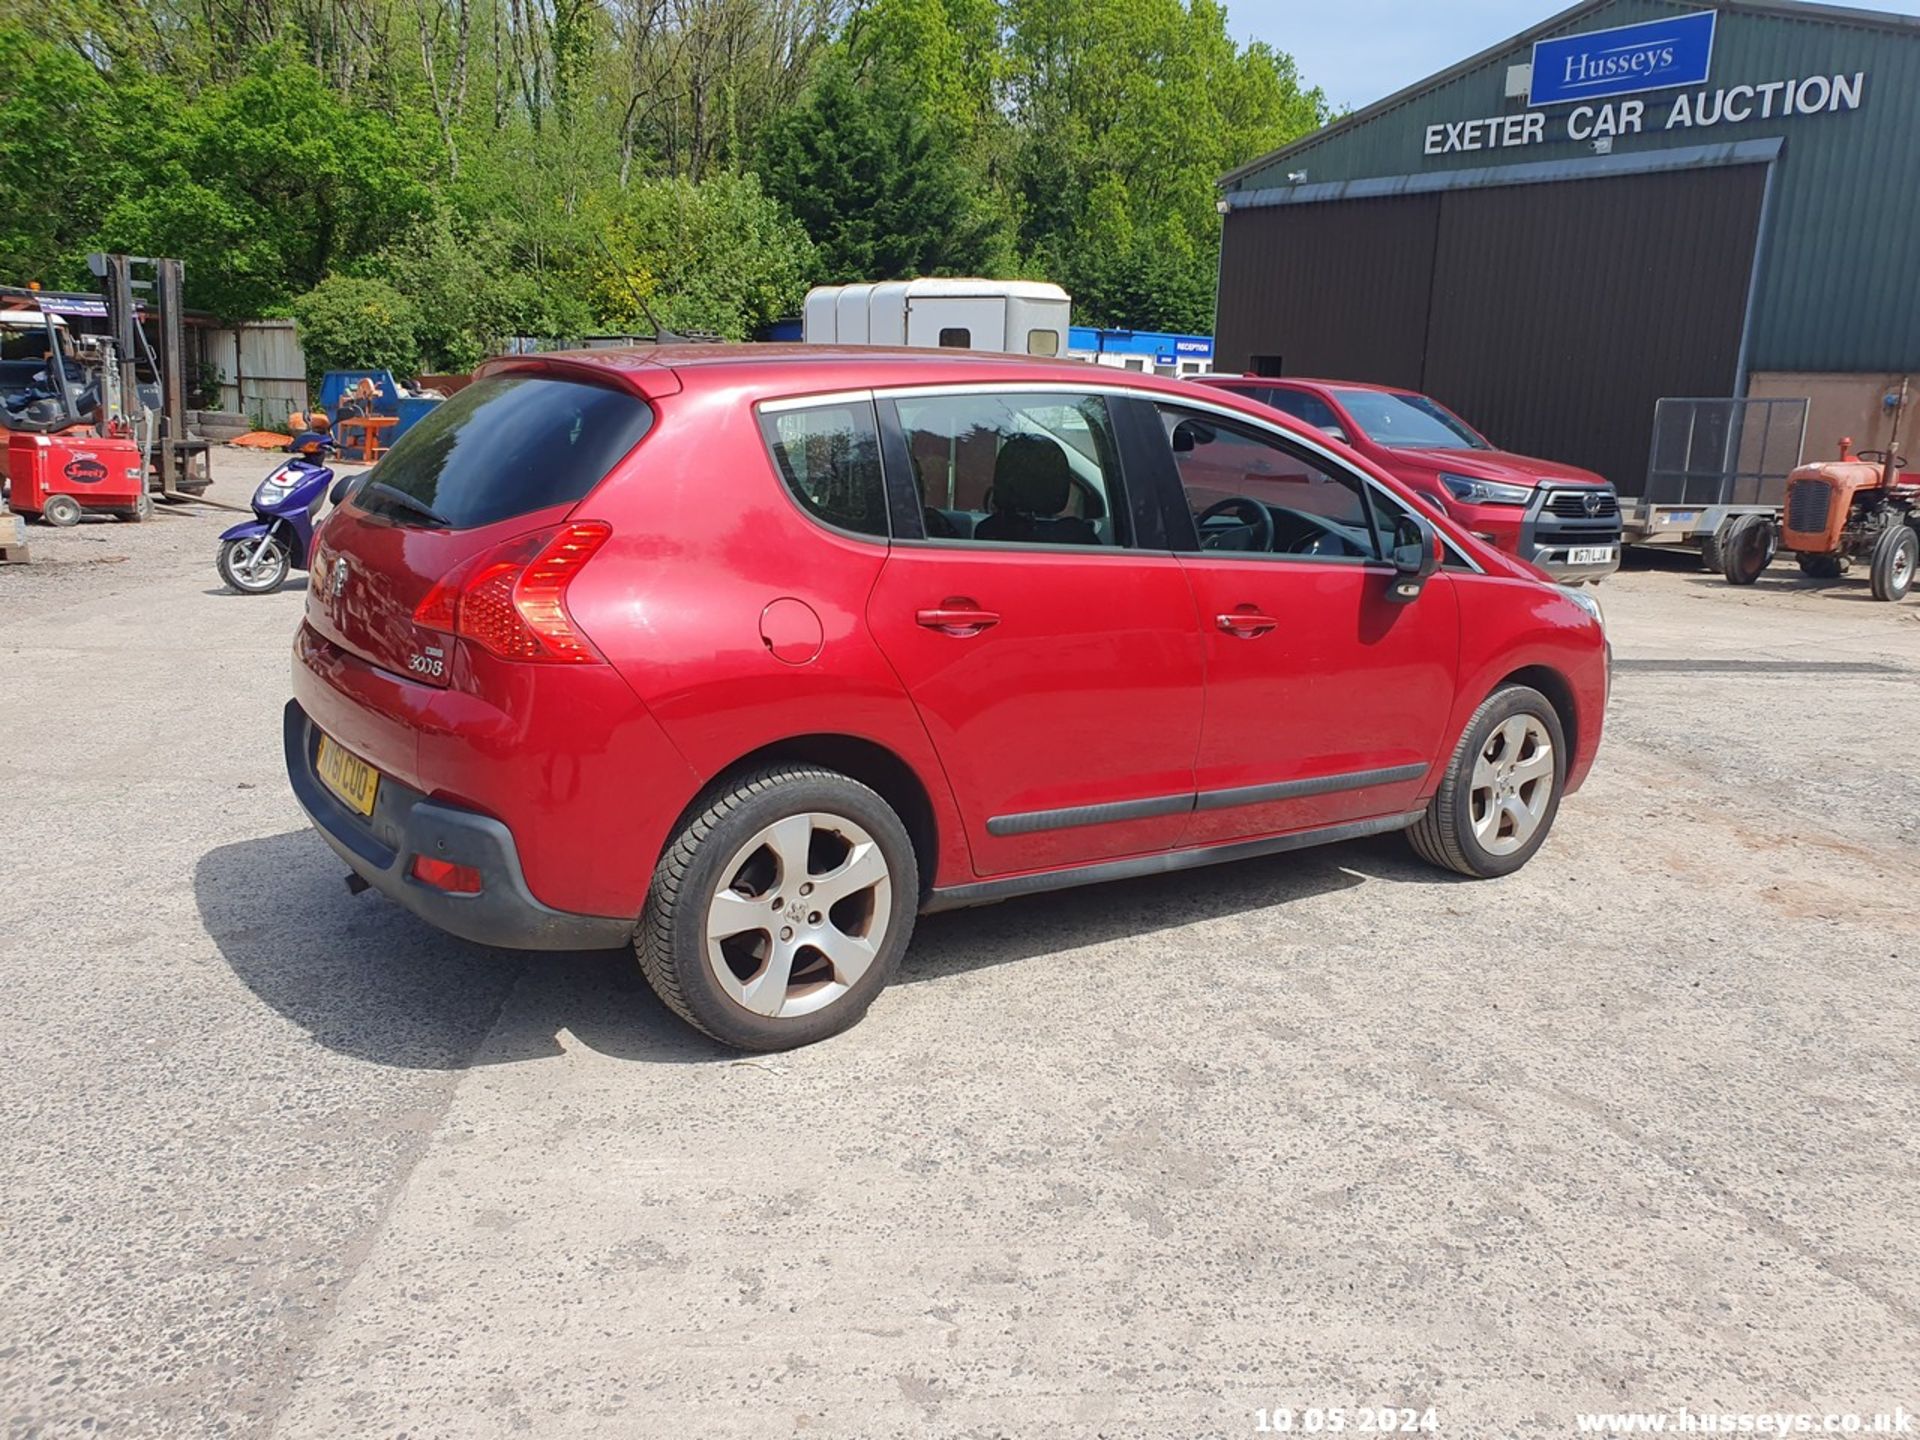 11/61 PEUGEOT 3008 SPORT E-HDI S-A - 1560cc 5dr Hatchback (Red, 89k) - Image 10 of 49